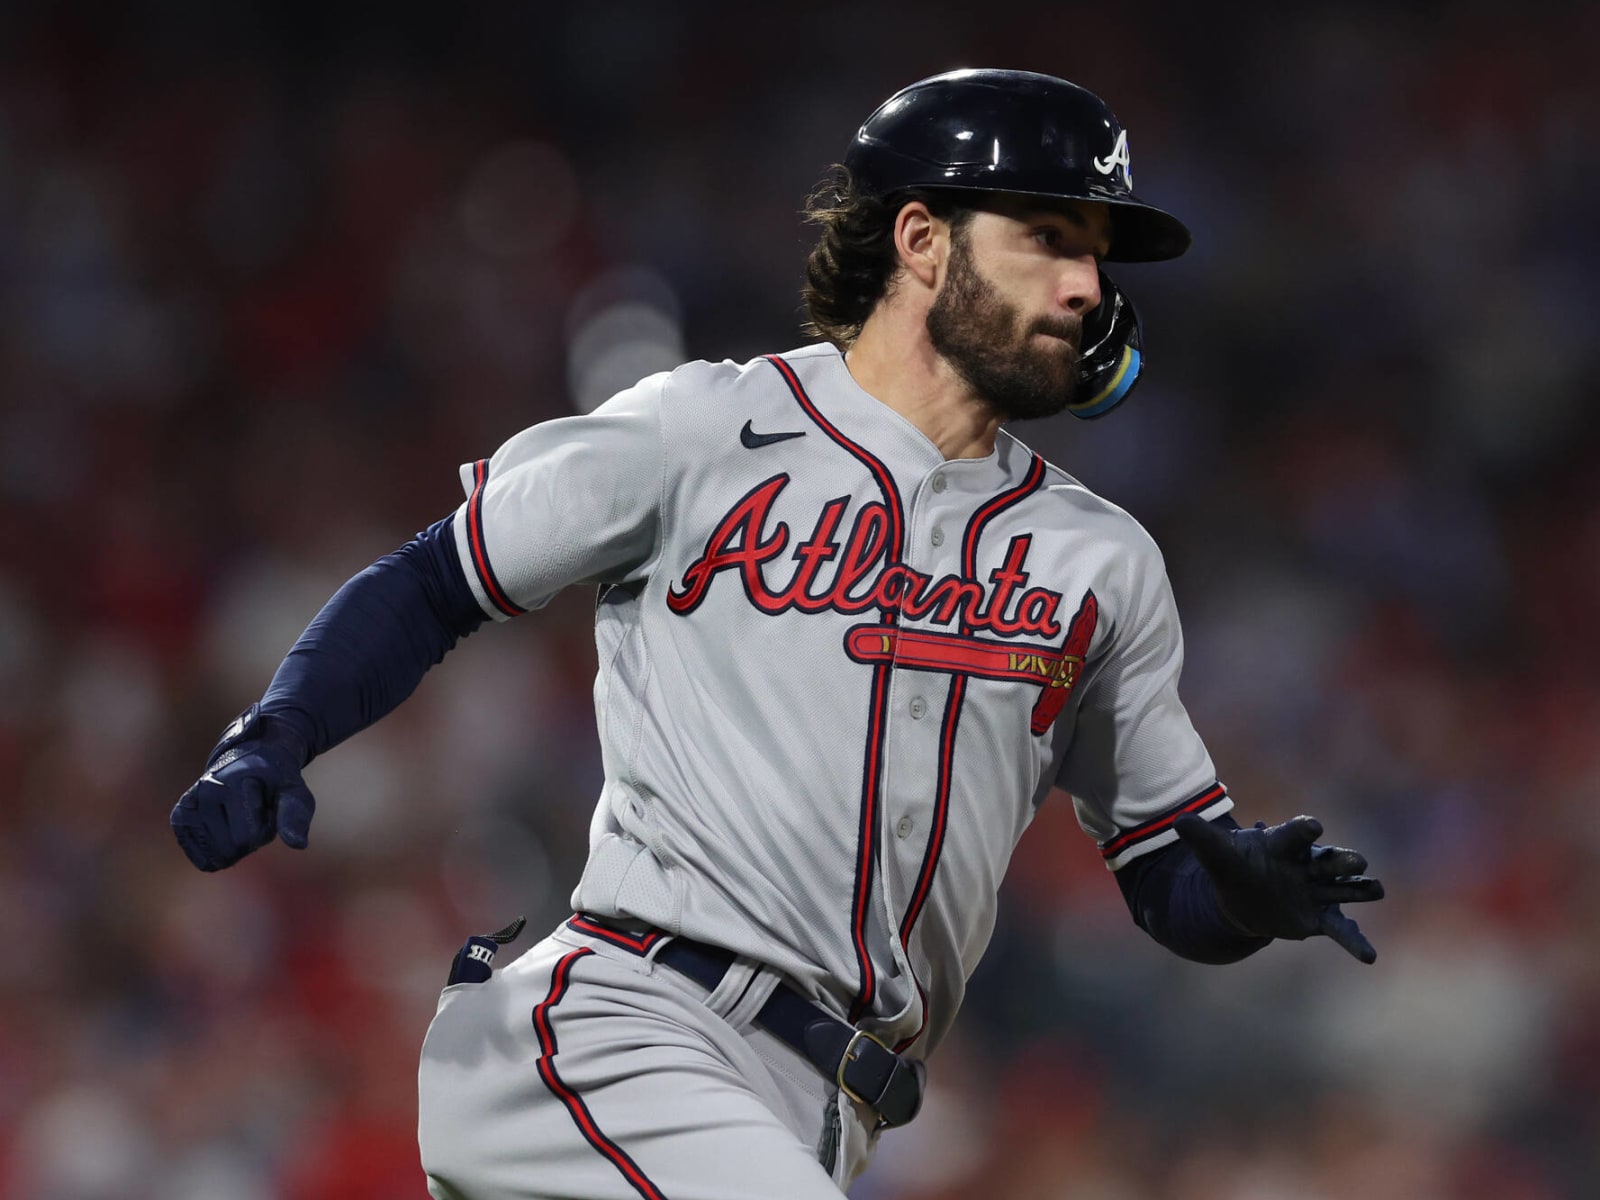 Atlanta Braves: Dansby Swanson's World Series instincts rooted at Vandy